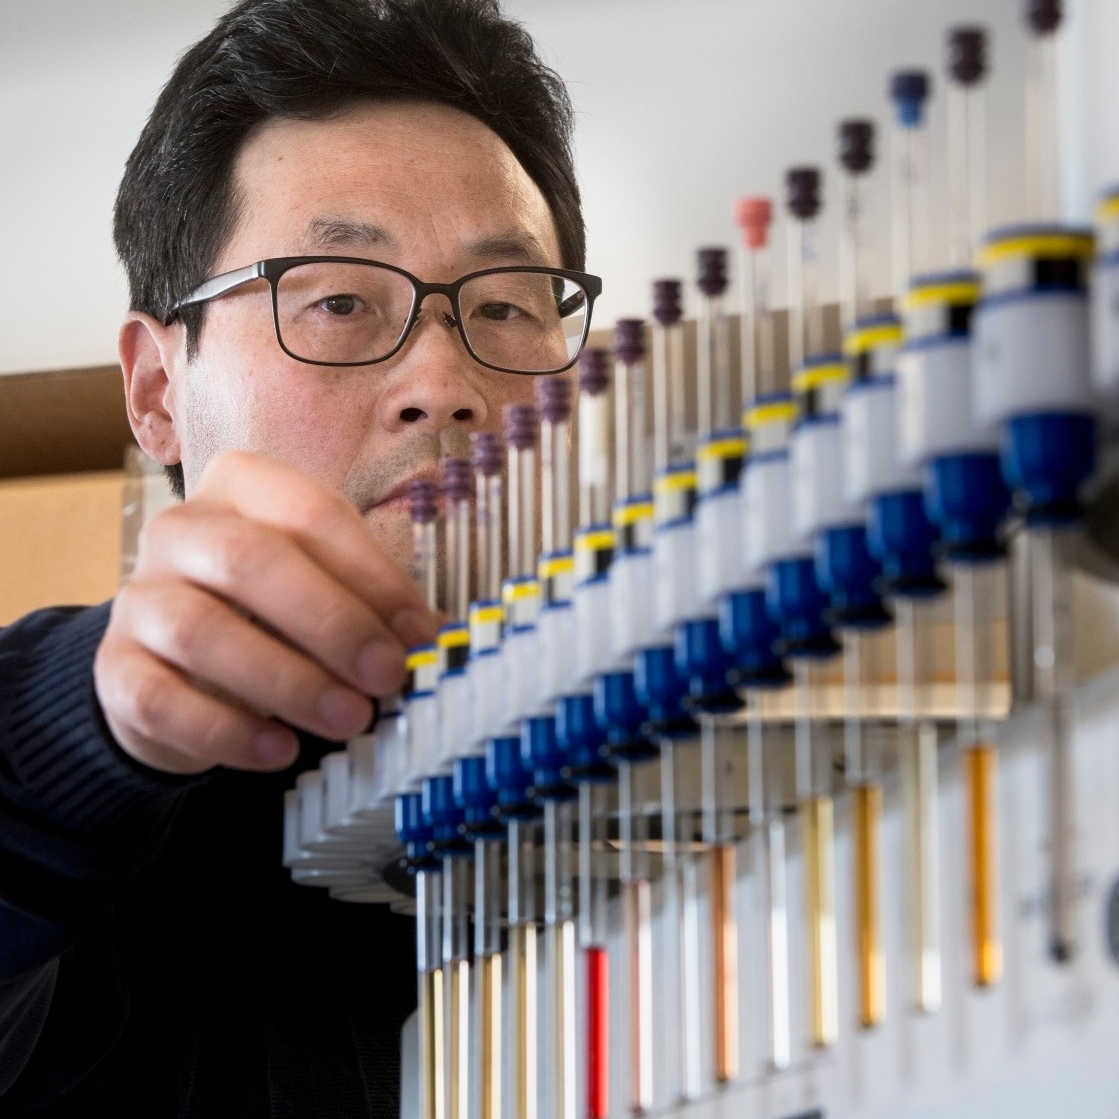 Nuclear Magenetic Resonance, man standing by row of test tubes